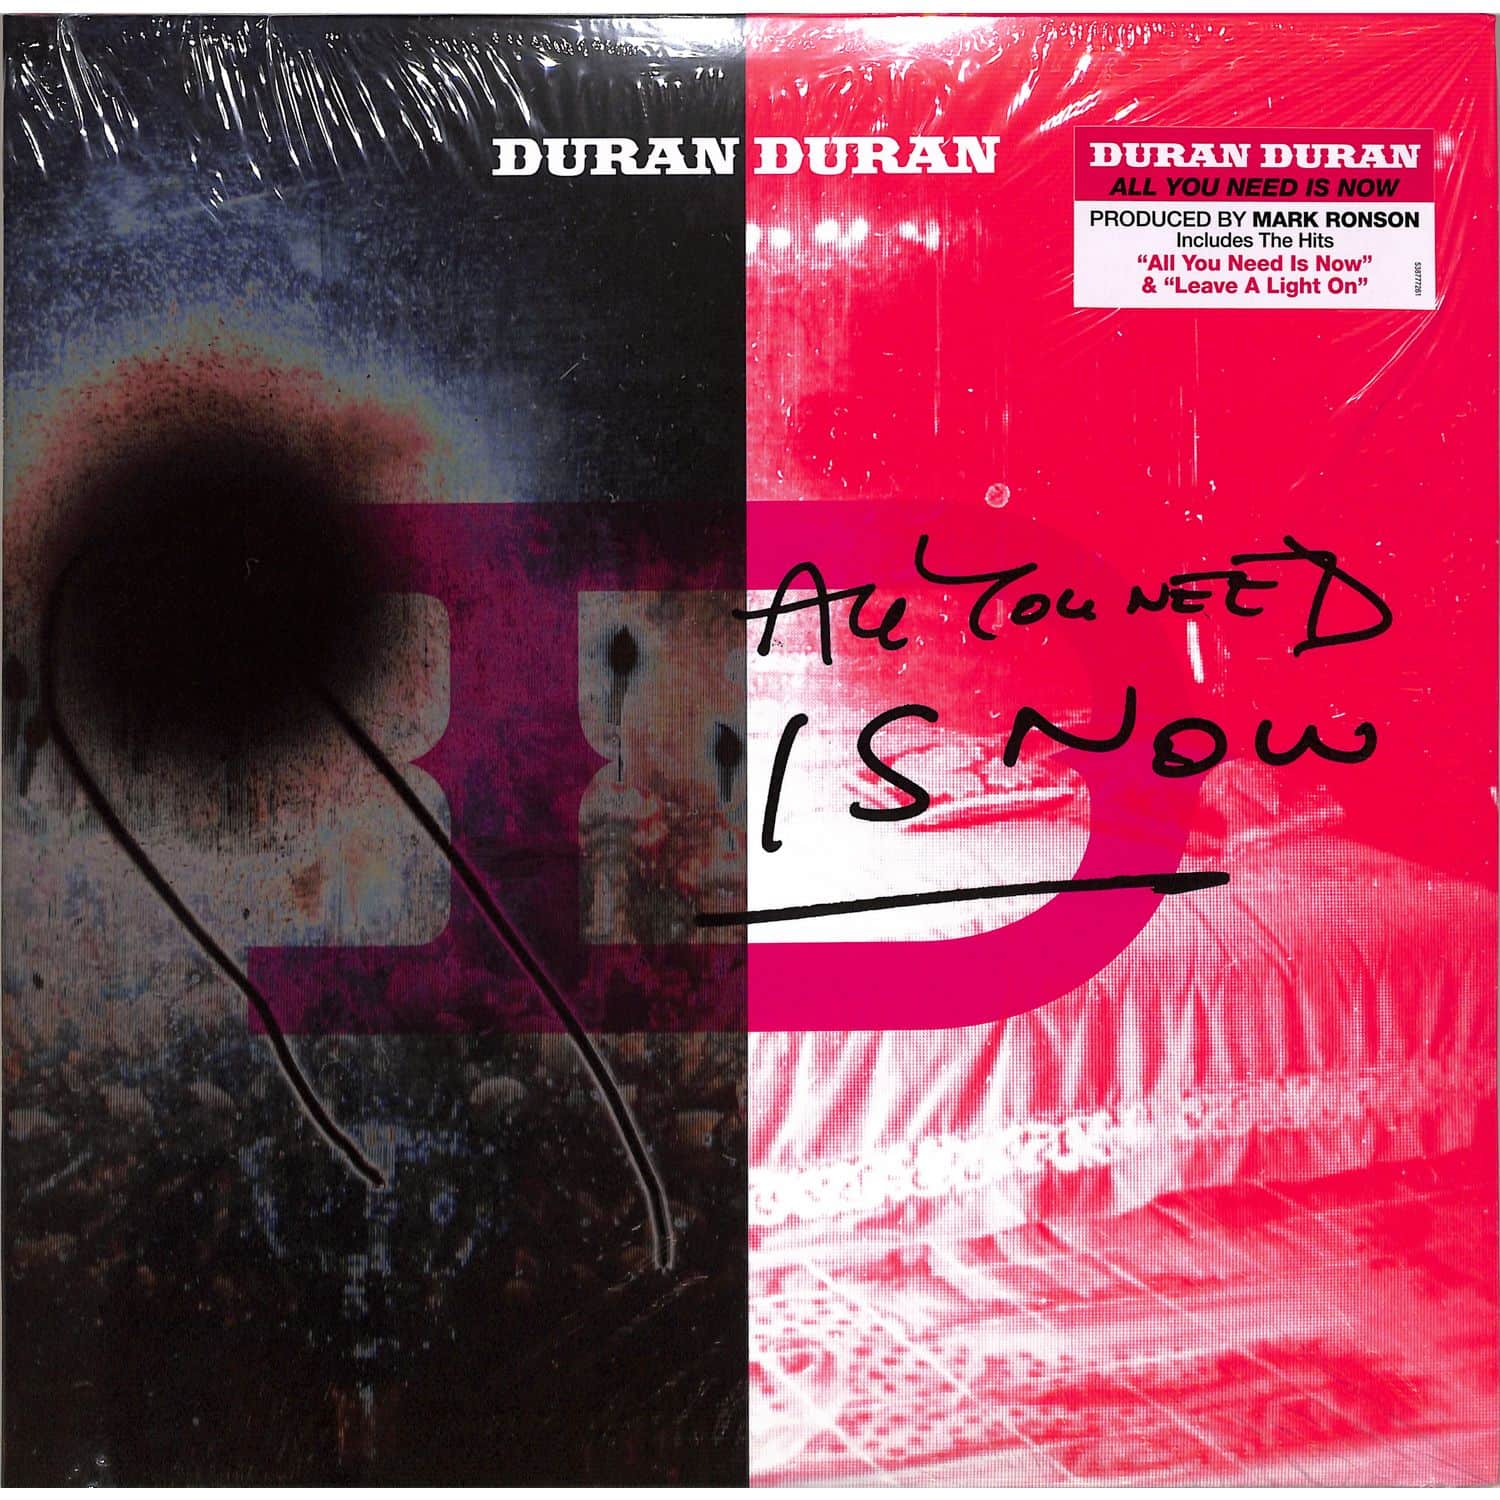 Duran Duran - ALL YOU NEED IS NOW 